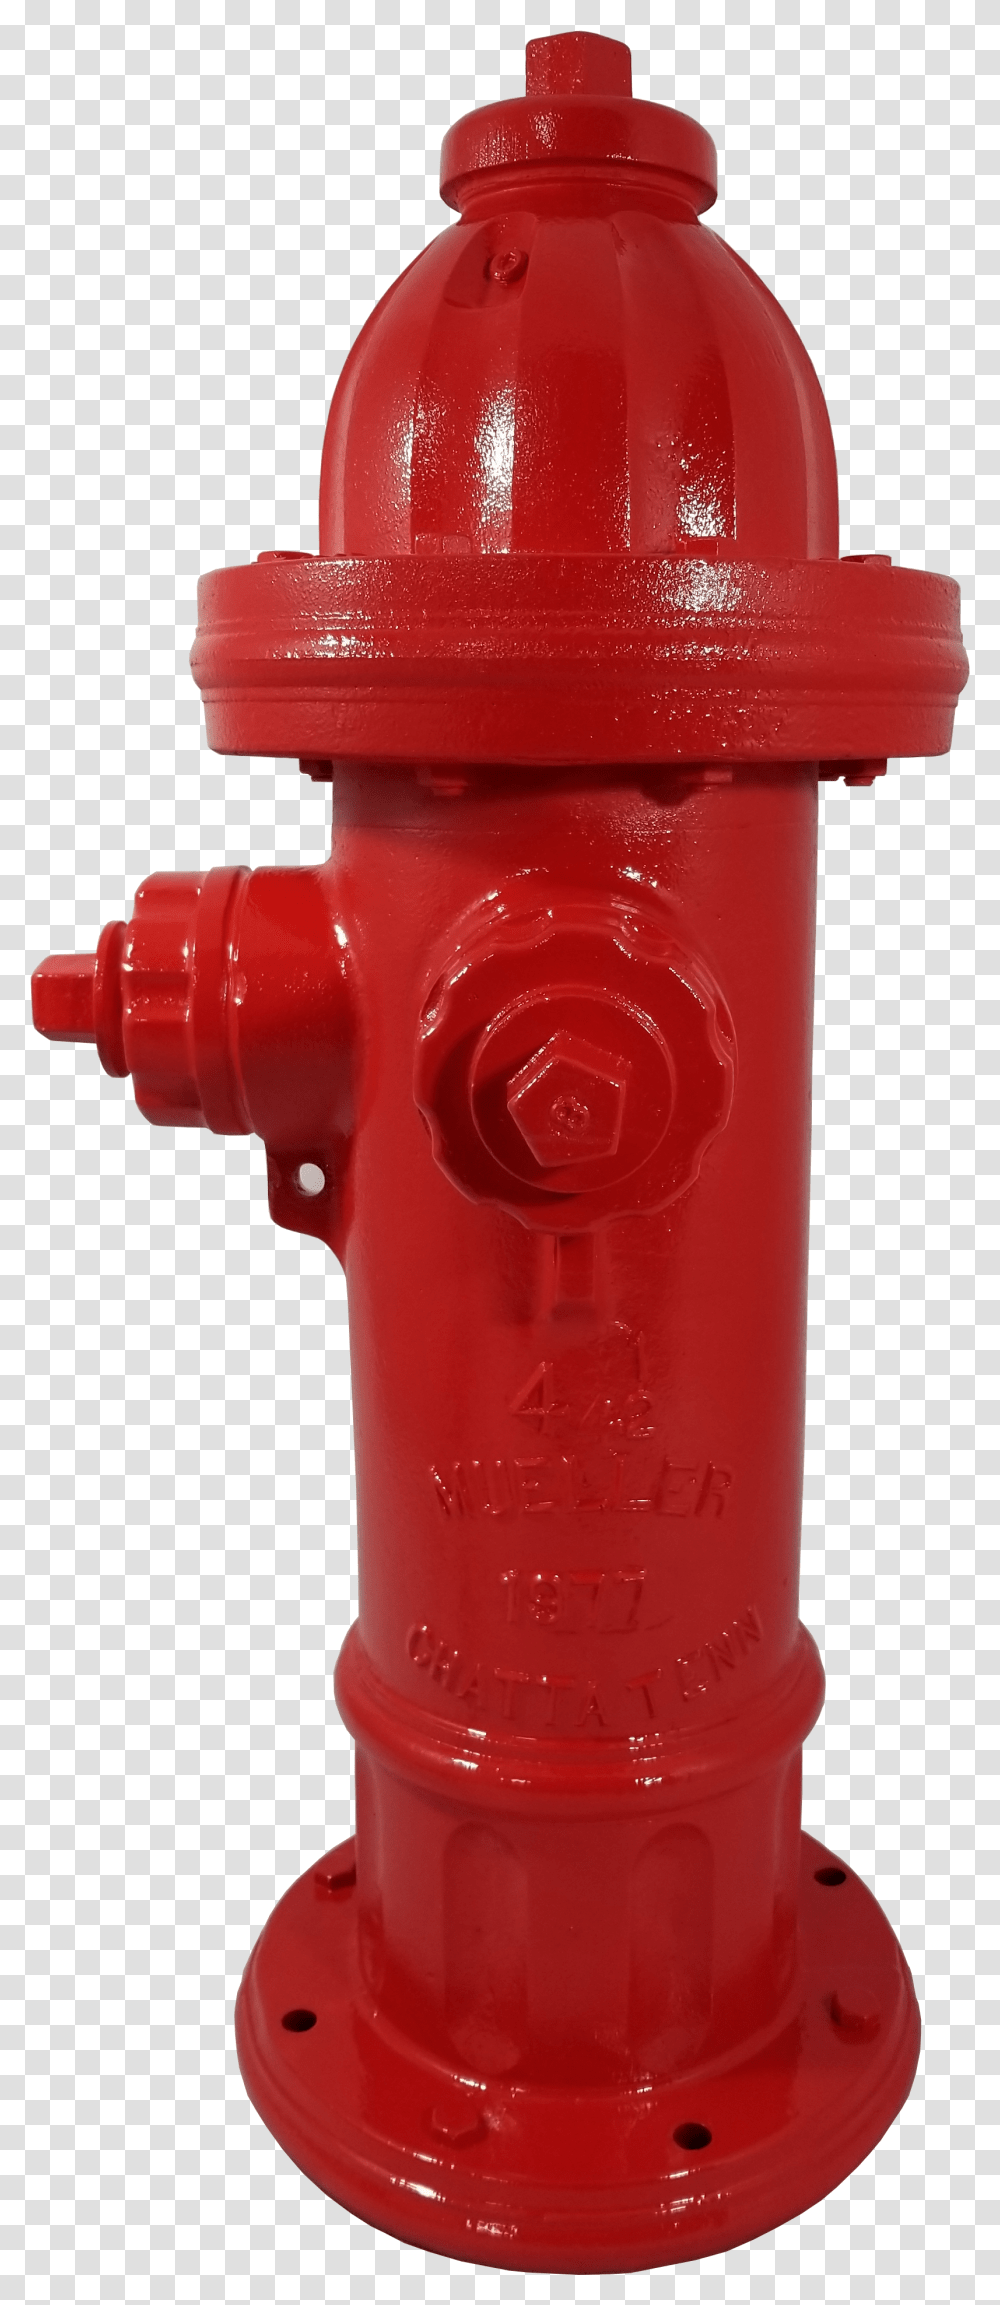 Yellow Fire Hydrant Free File Download Fire Hydrant Transparent Png